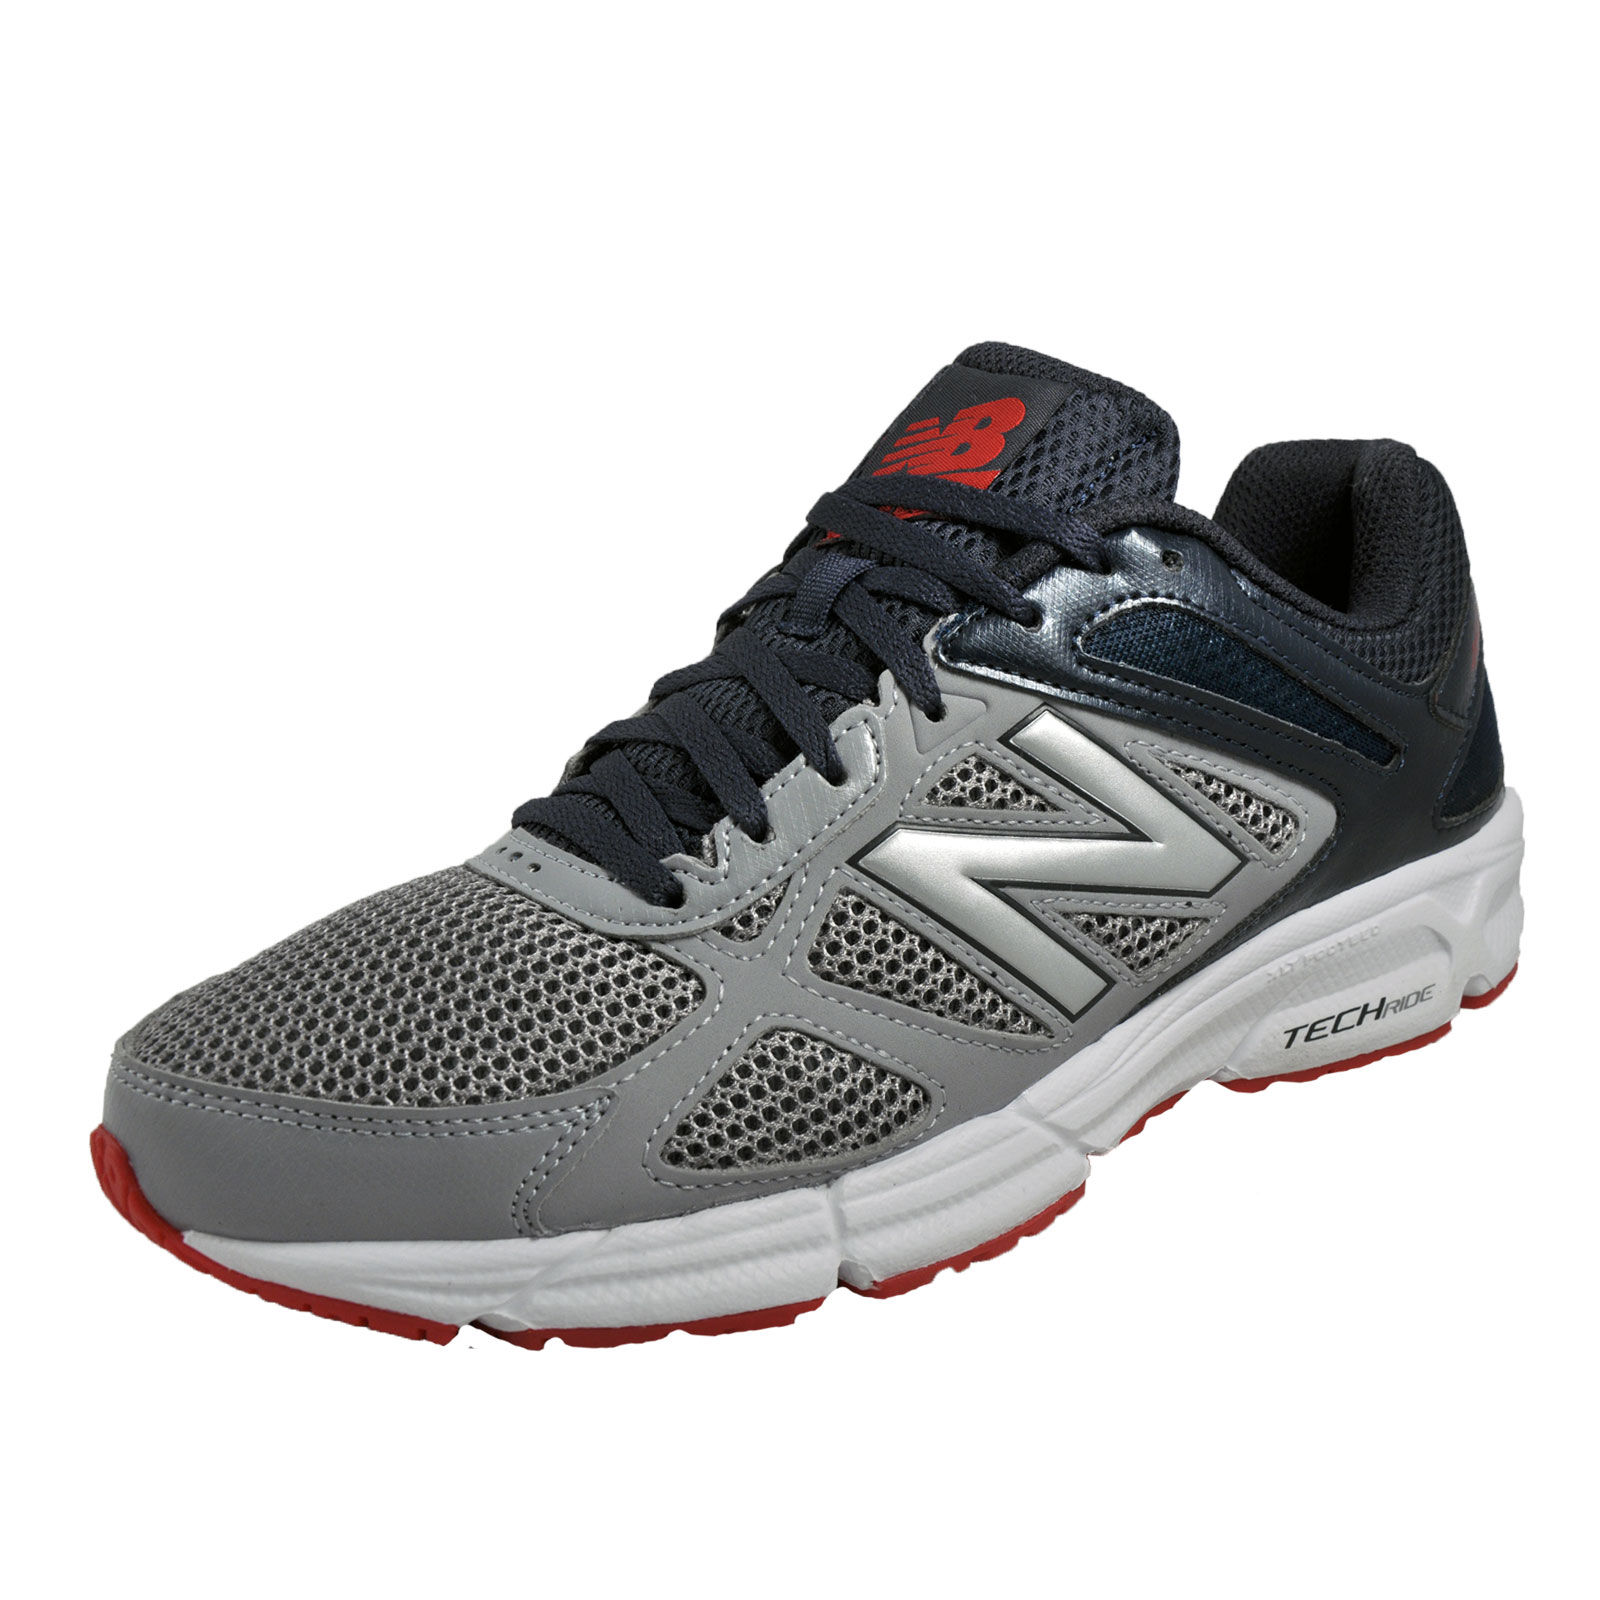 New Balance 460 Mens Running Fitness Gym Trainers Silver | eBay